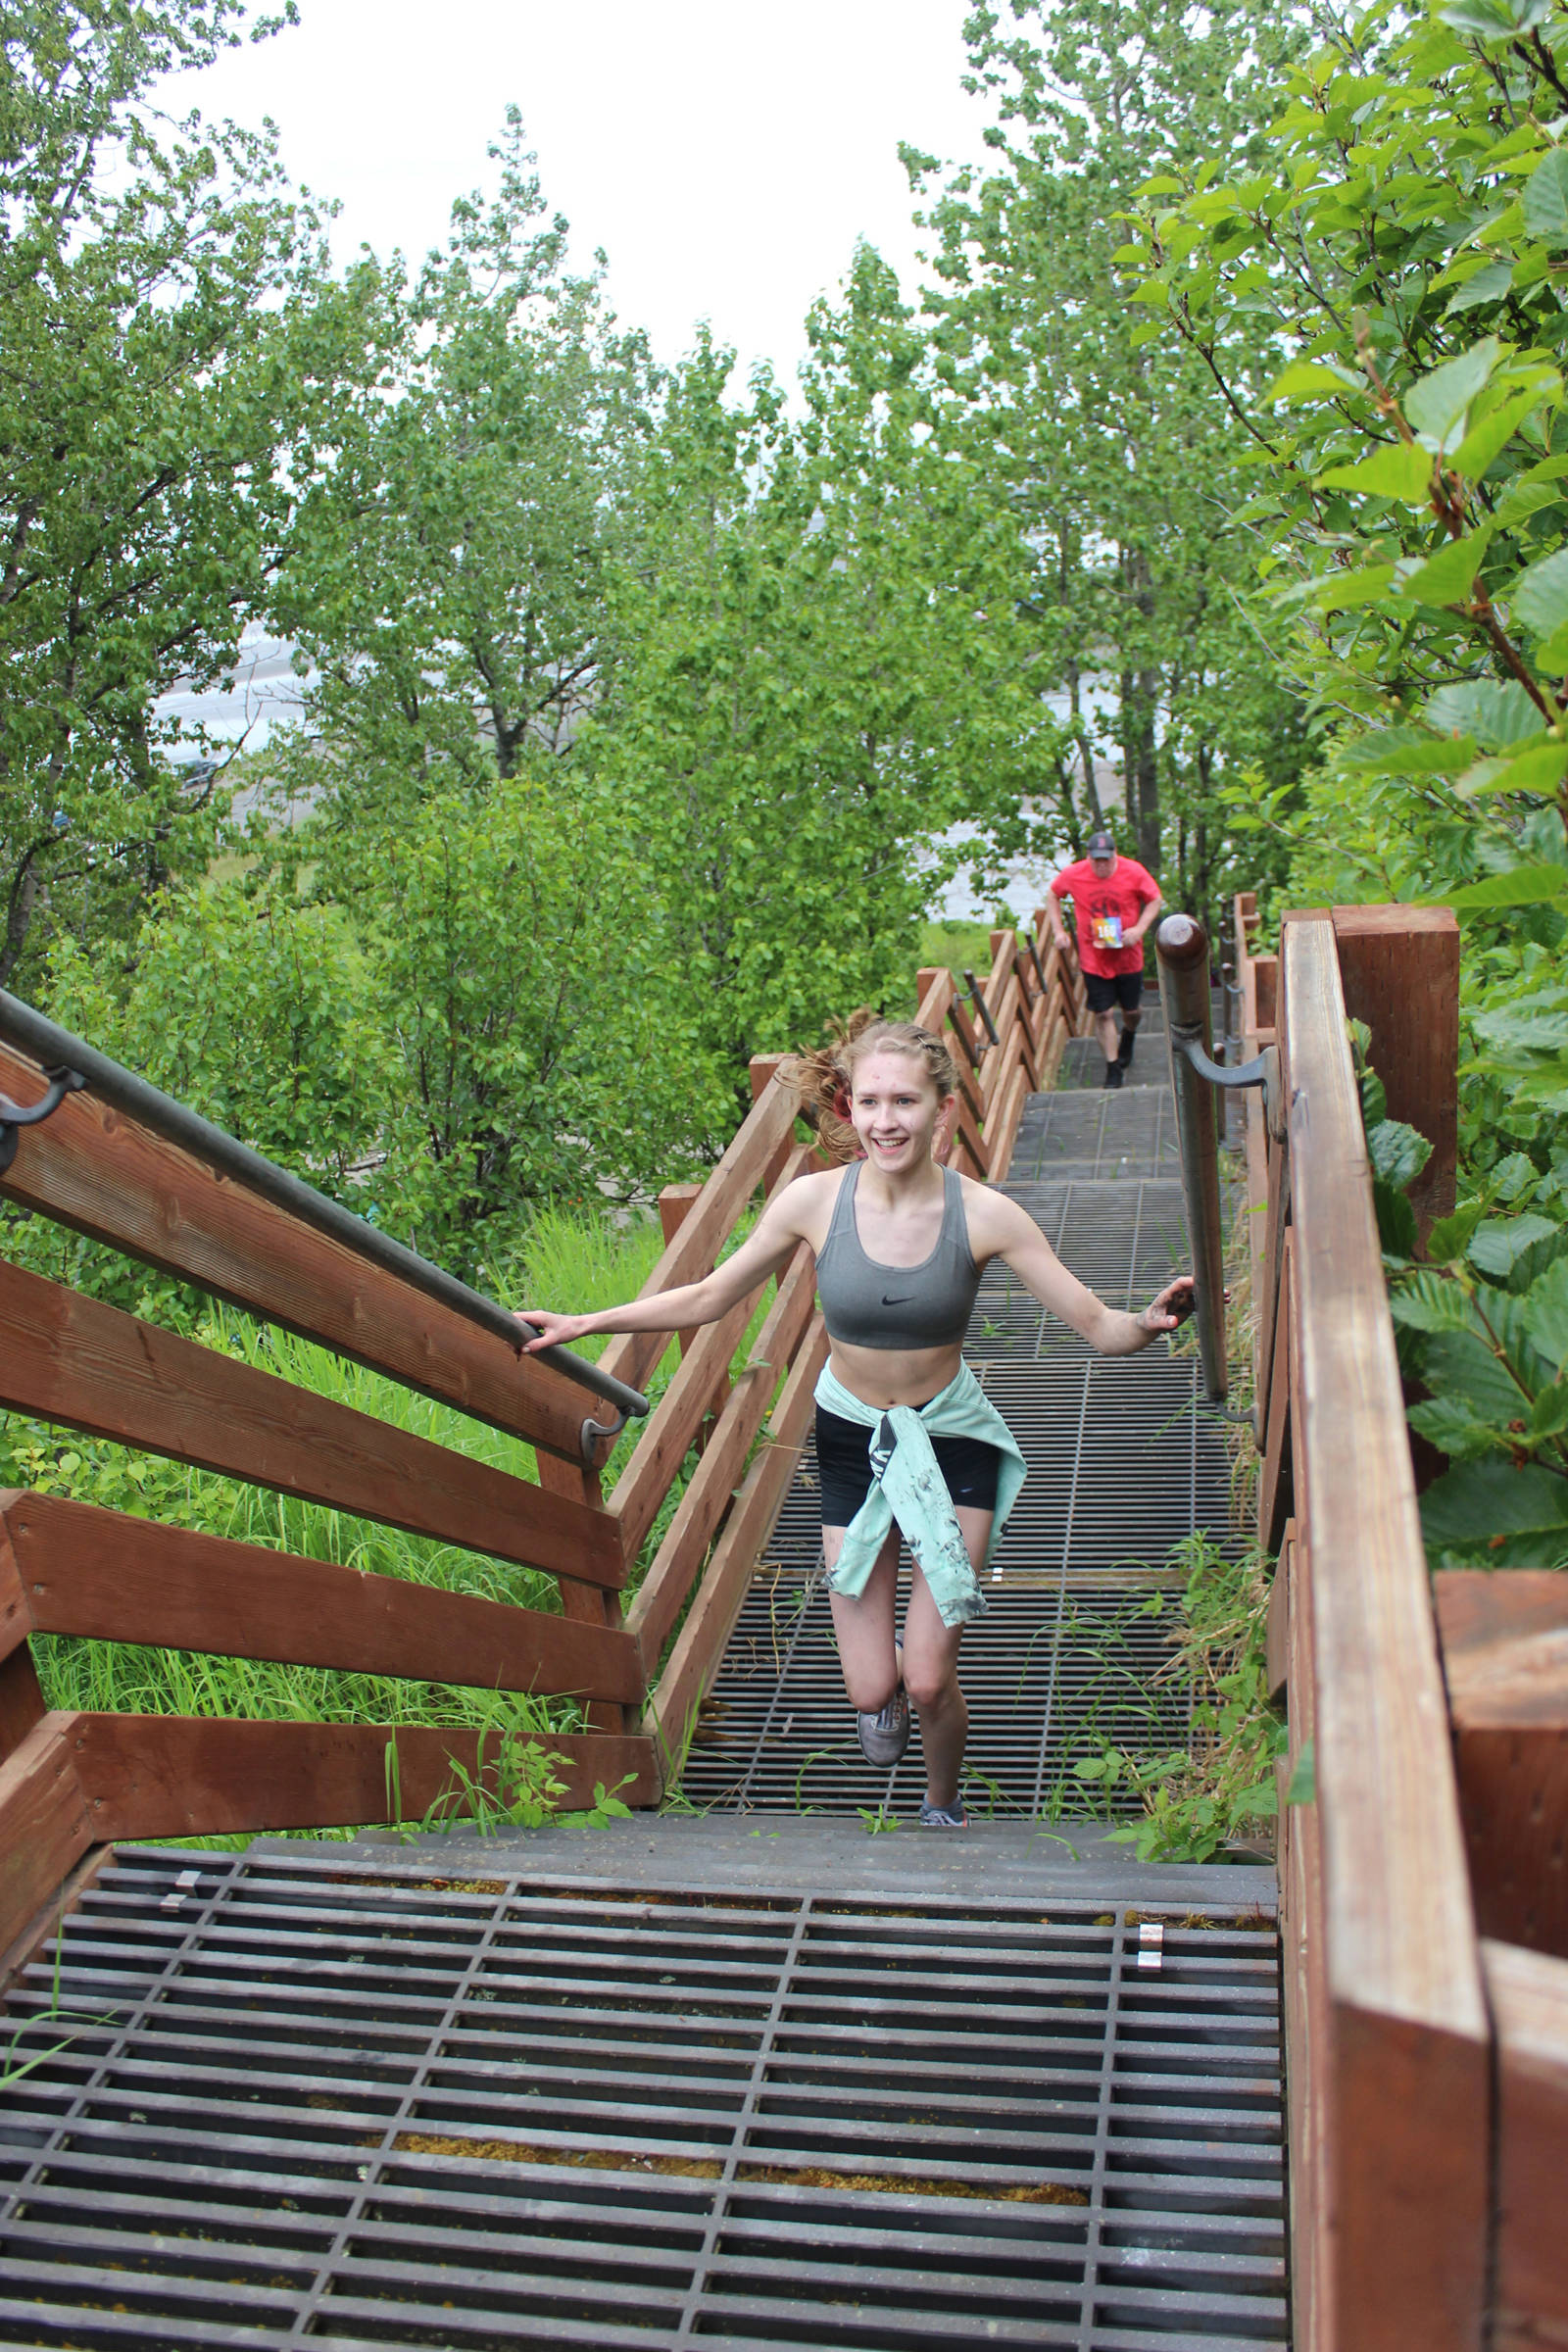 A smiling Jaycee Corey tackles the last challenge in the 2019 Clam Scramble: 115 stairs leading from Ninilchik beach to the finish line at the race held Saturday, June 15, 2019 in Ninilchik, Alaska. (Photo by McKibben Jackinsky)